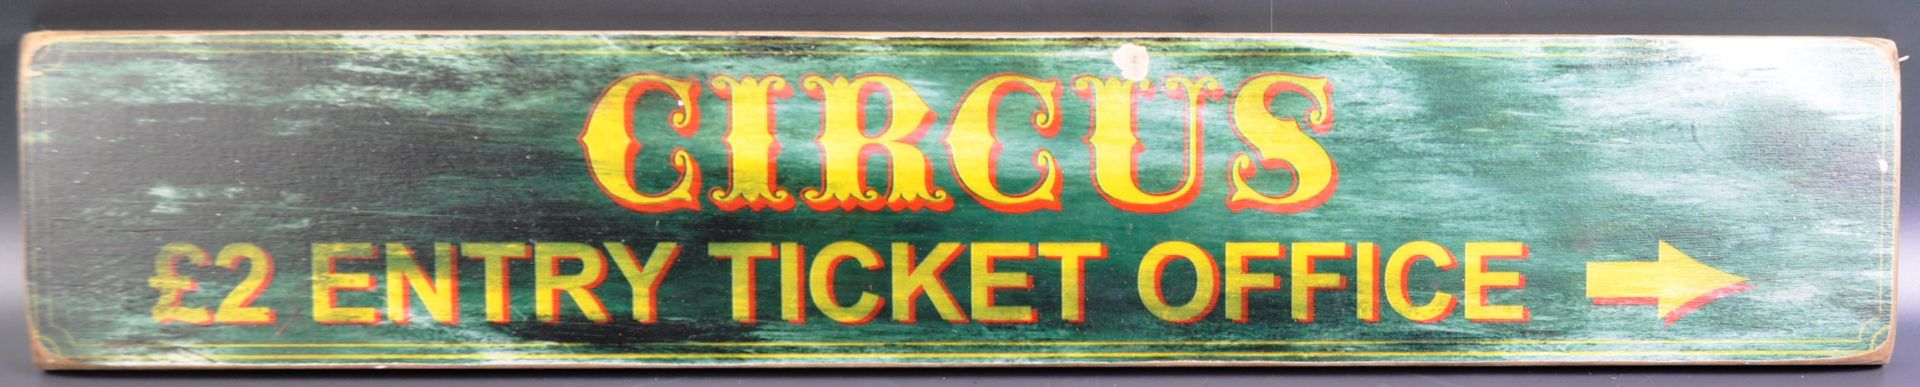 CONTEMPORARY WOODEN SIGN FOR CIRCUS £2 ENTRY TICKET OFFICE